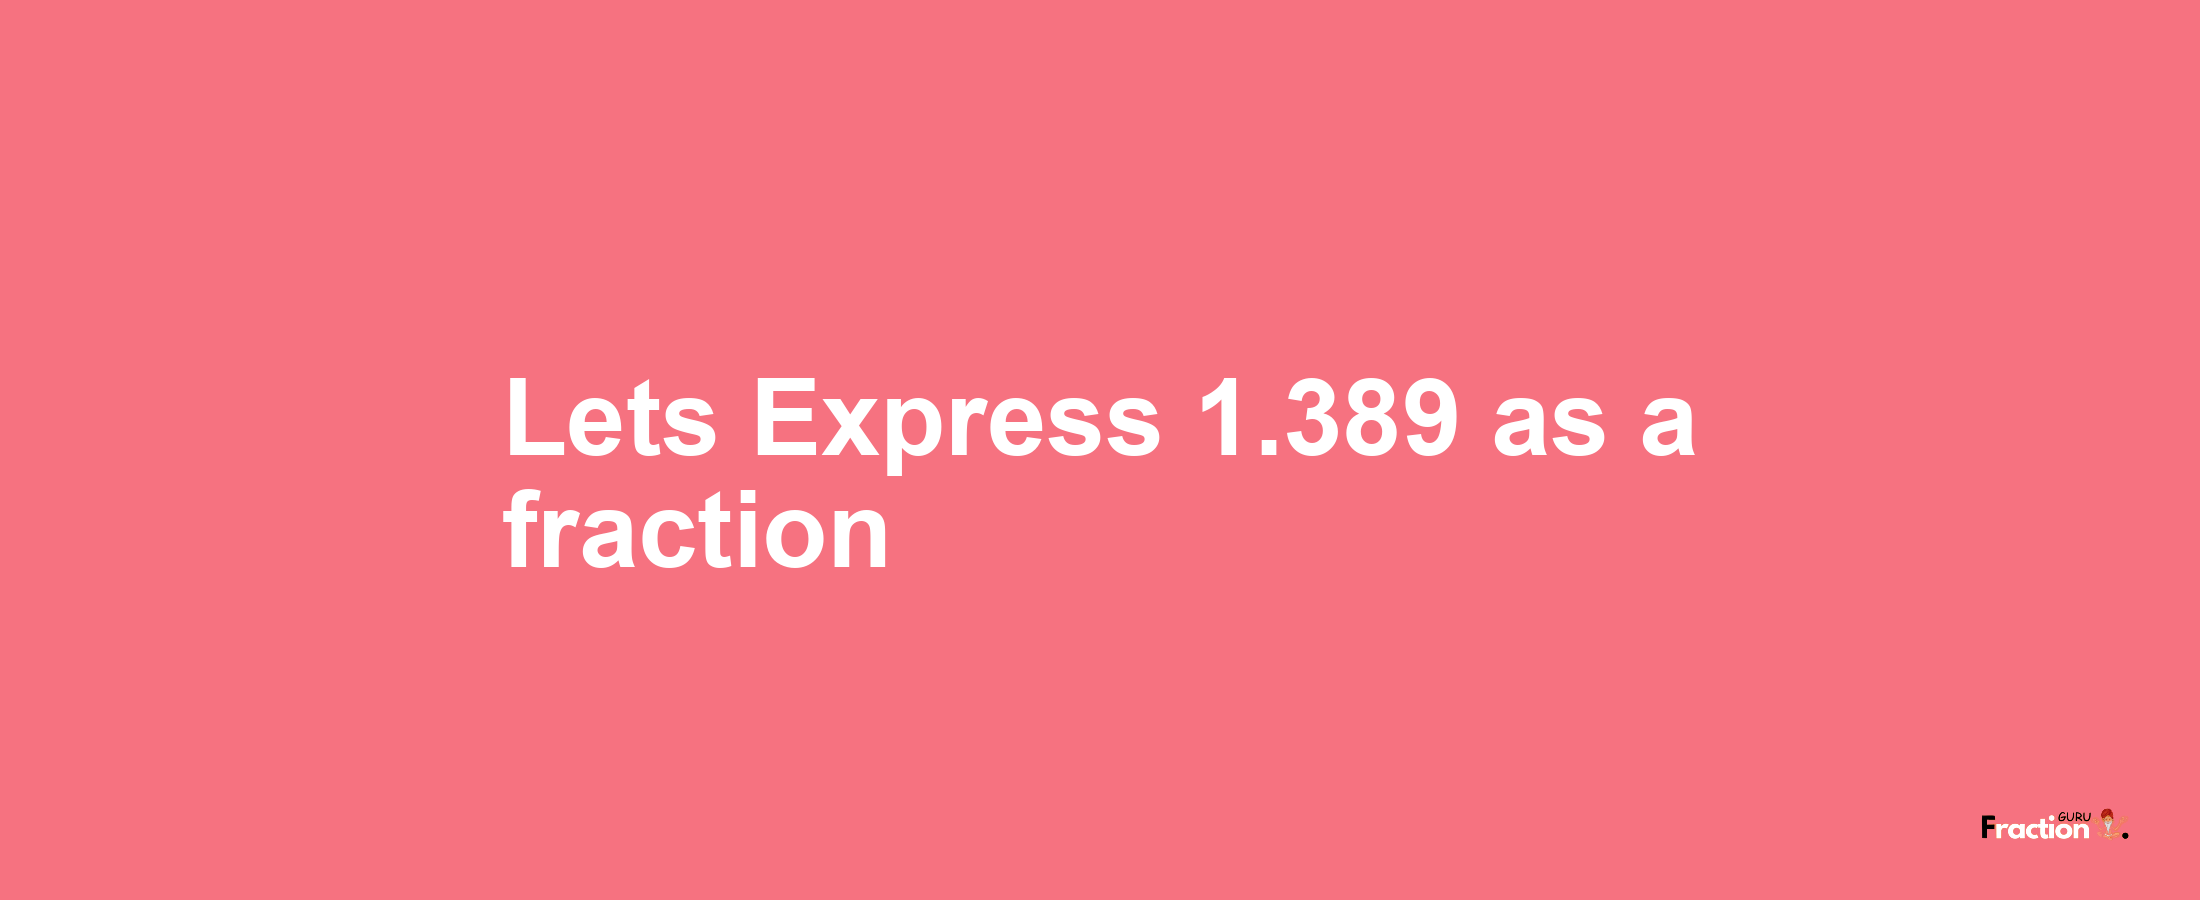 Lets Express 1.389 as afraction